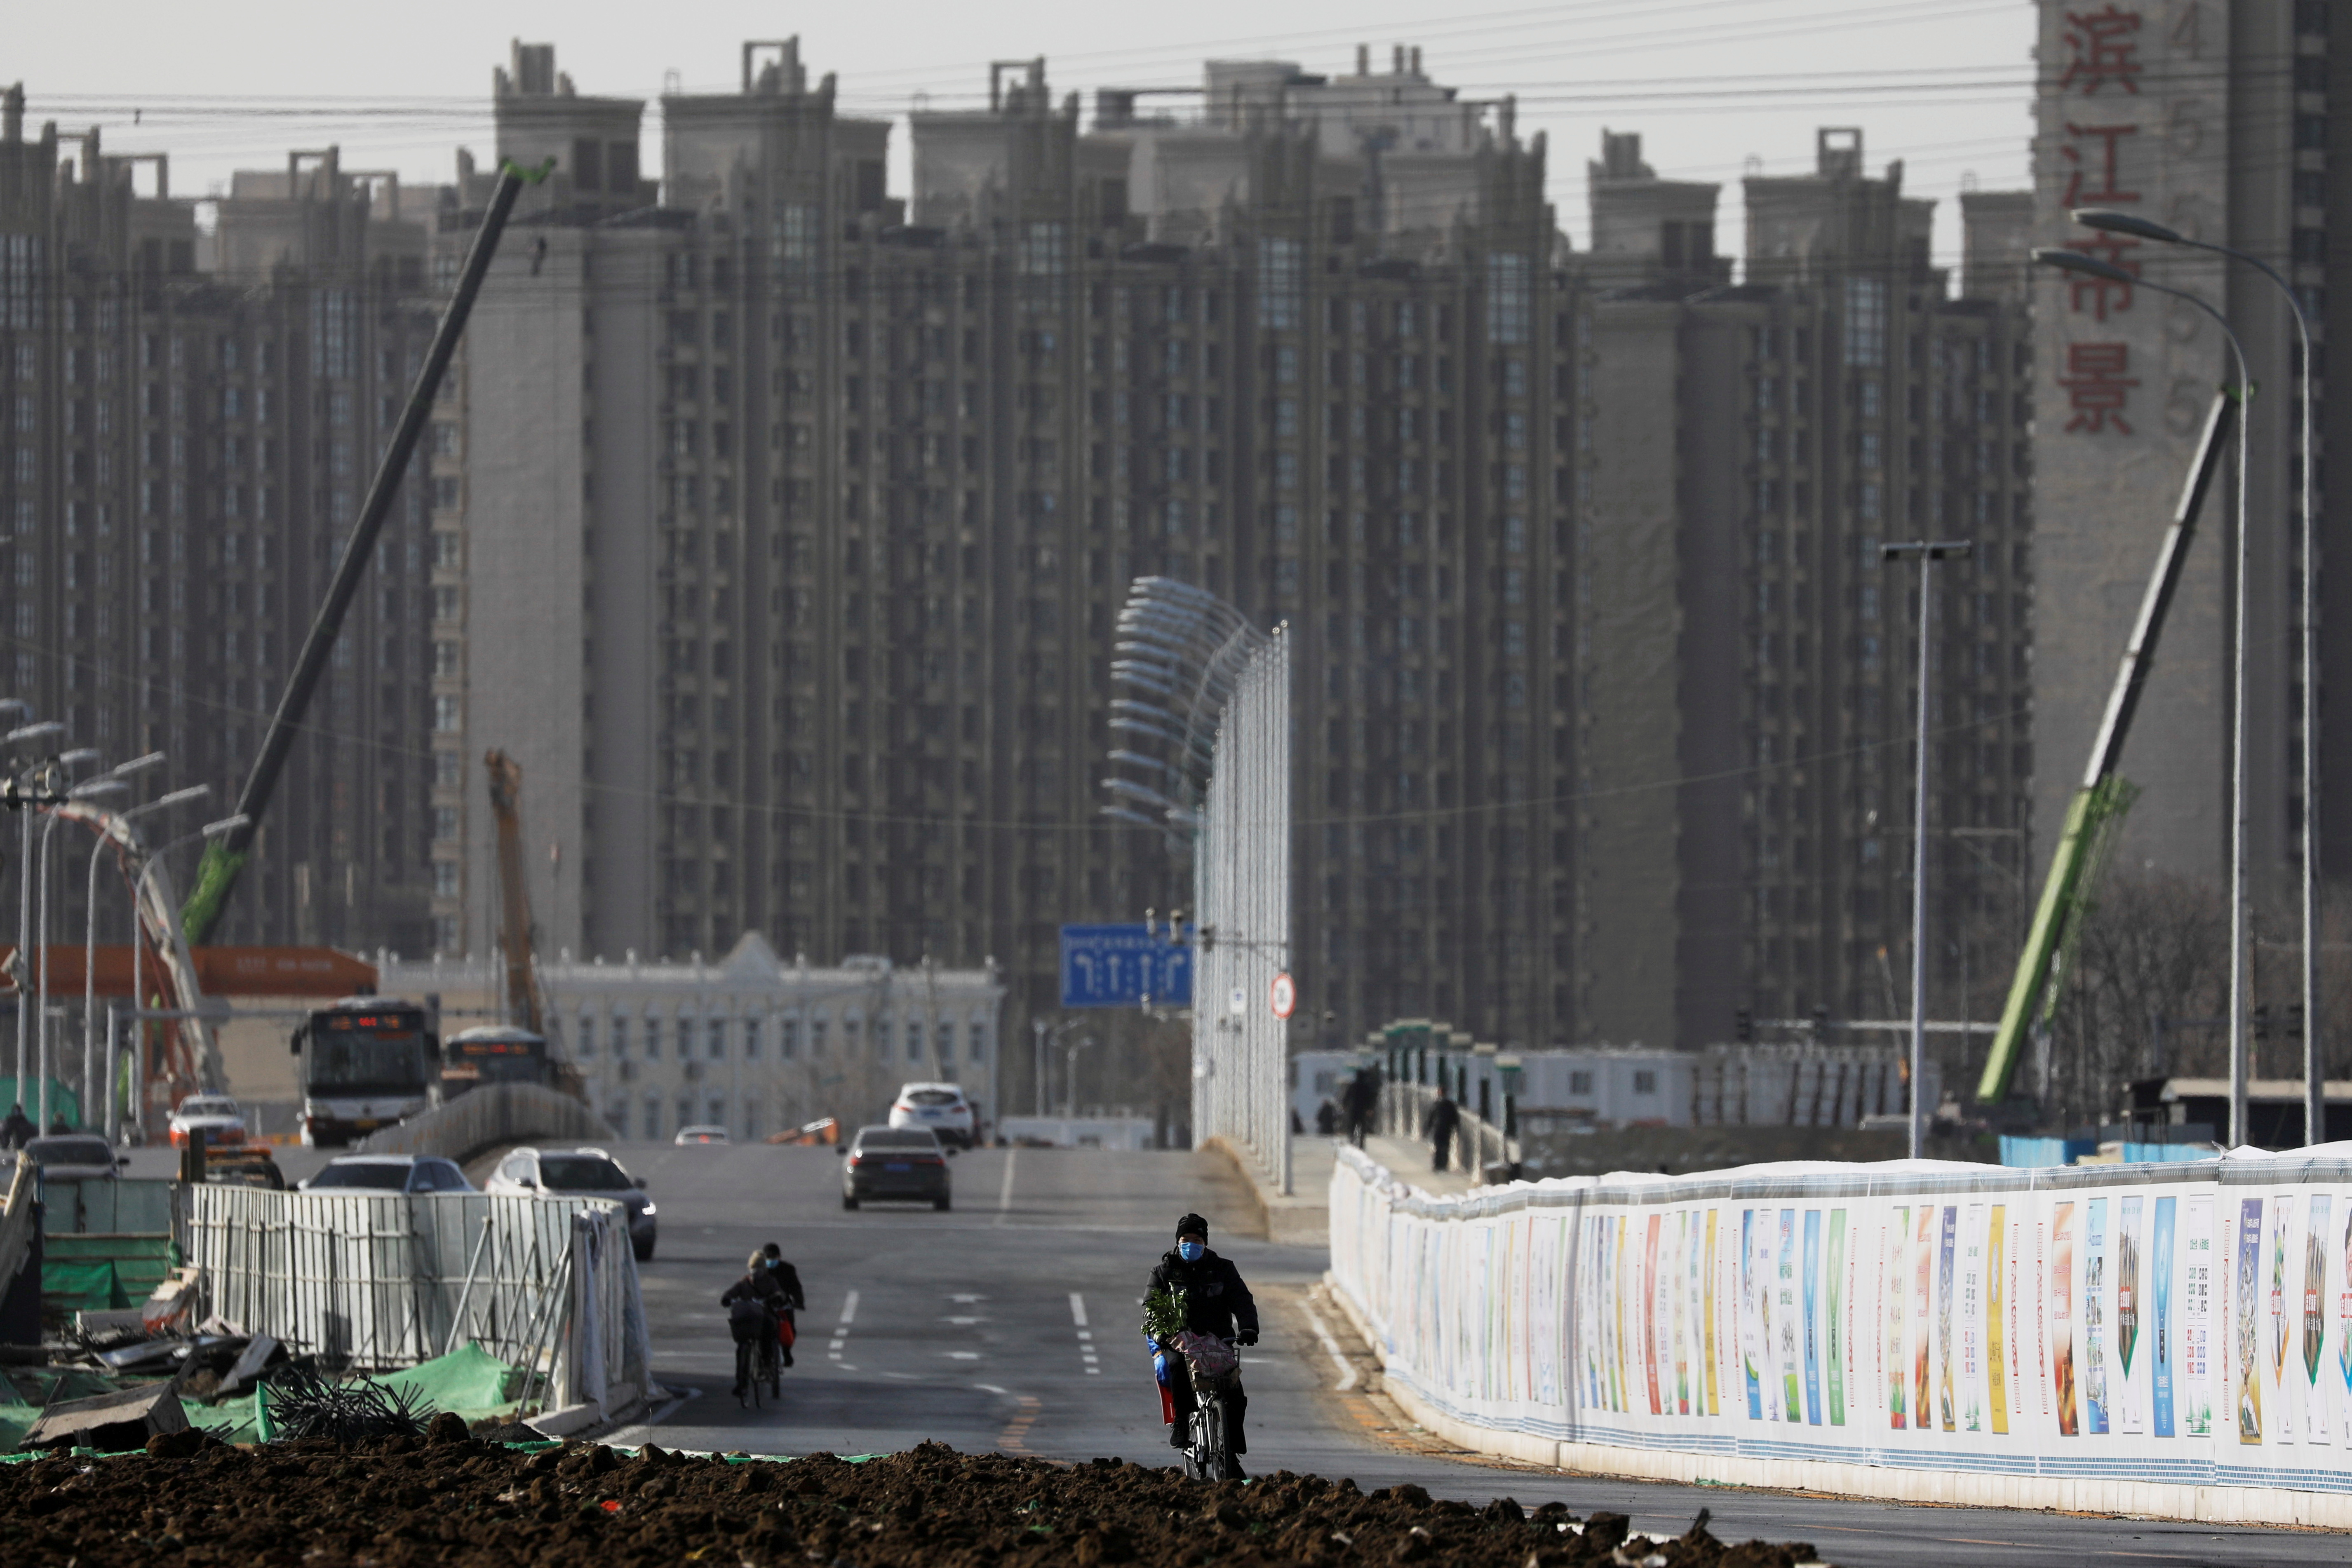 FILE PHOTO: A man rides a bicycle next to a construction site near residential buildings in Beijing, China, January 13, 2021. Picture taken January 13, 2021. REUTERS/Tingshu Wang/File Photo/File Photo